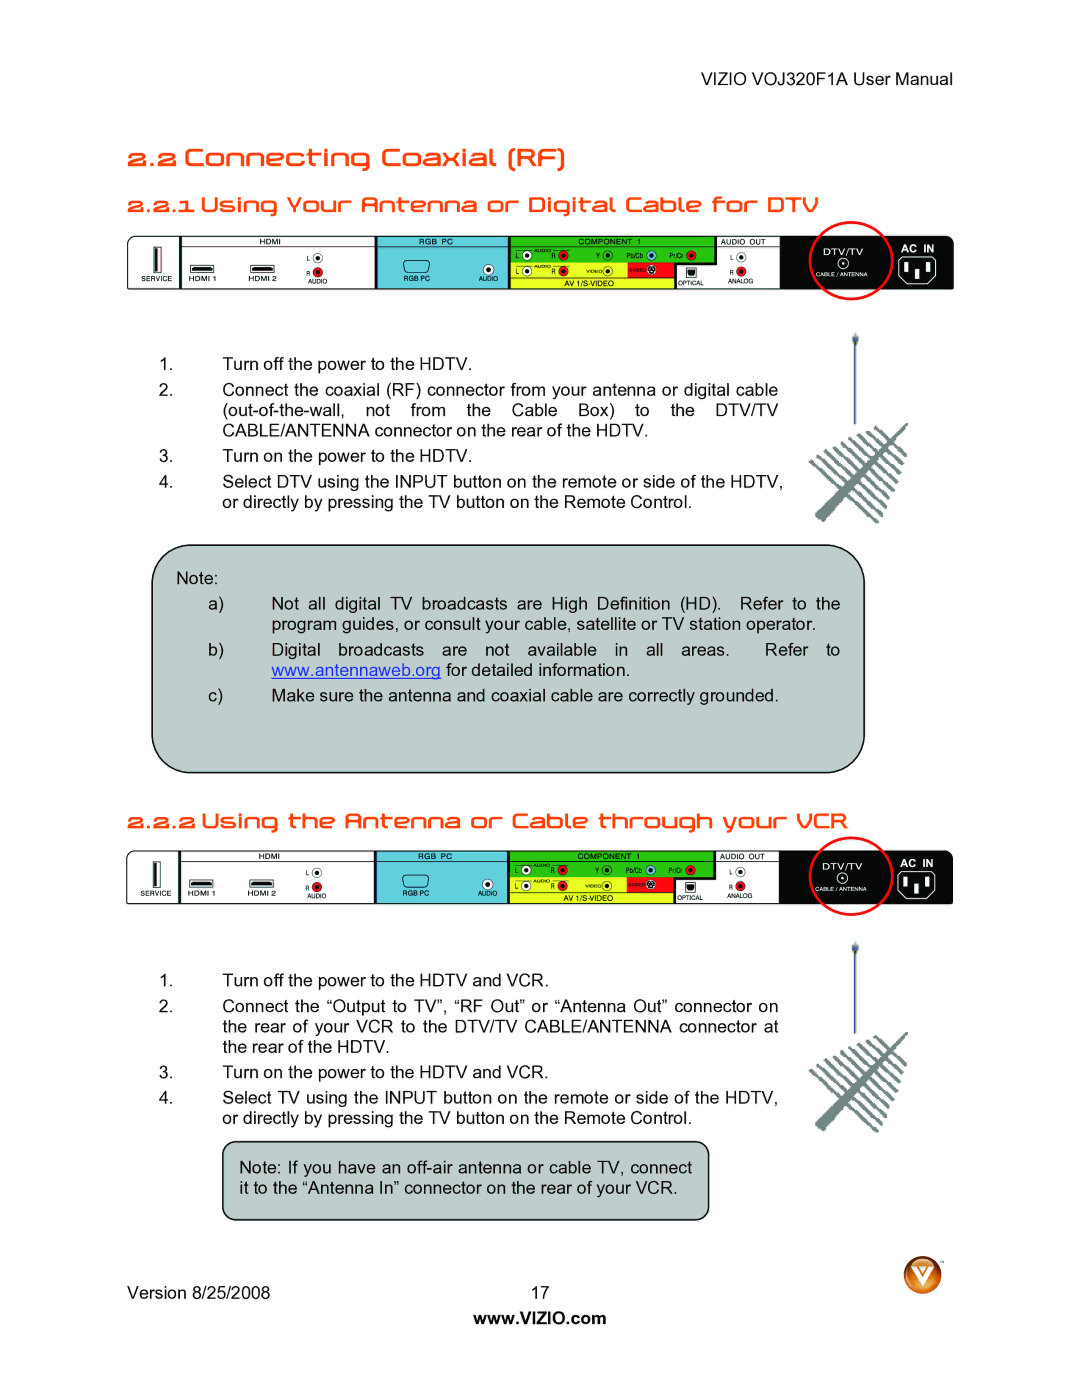 Vizio VOJ320F1A user manual Connecting Coaxial RF, Using Your Antenna or Digital Cable for DTV 